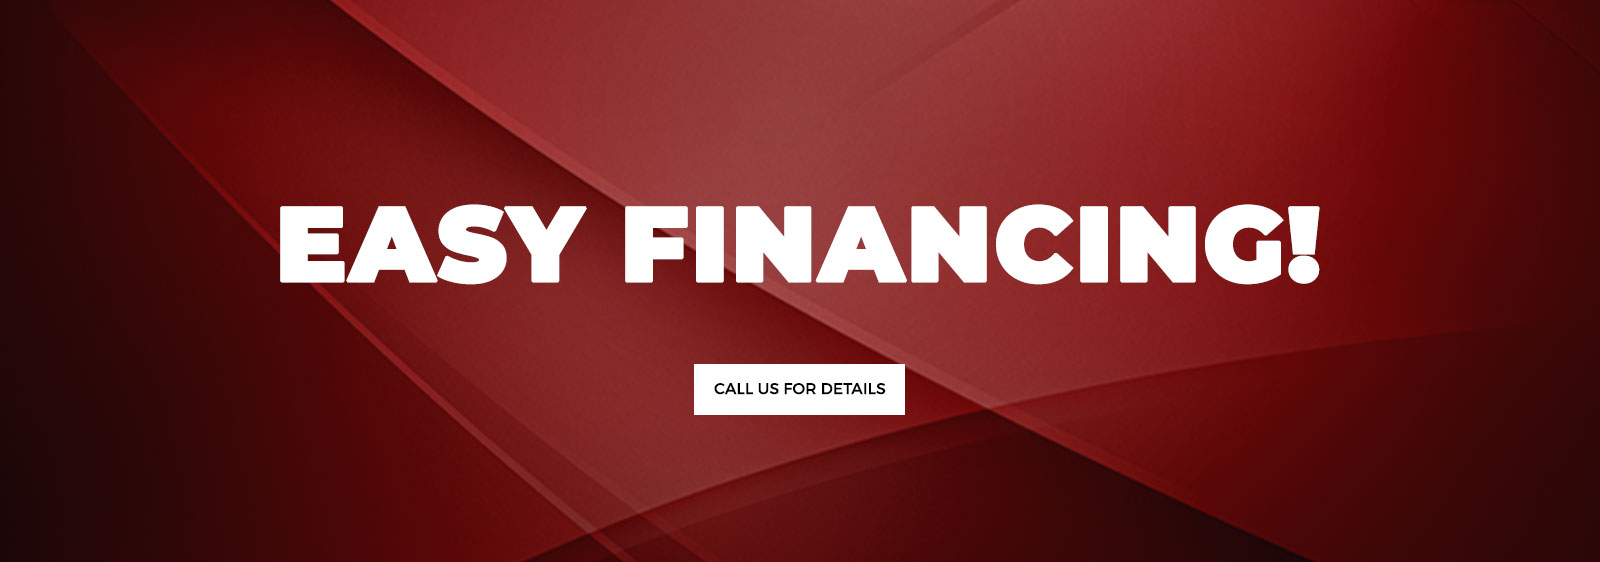 Easy Financing! Contact Us for Information